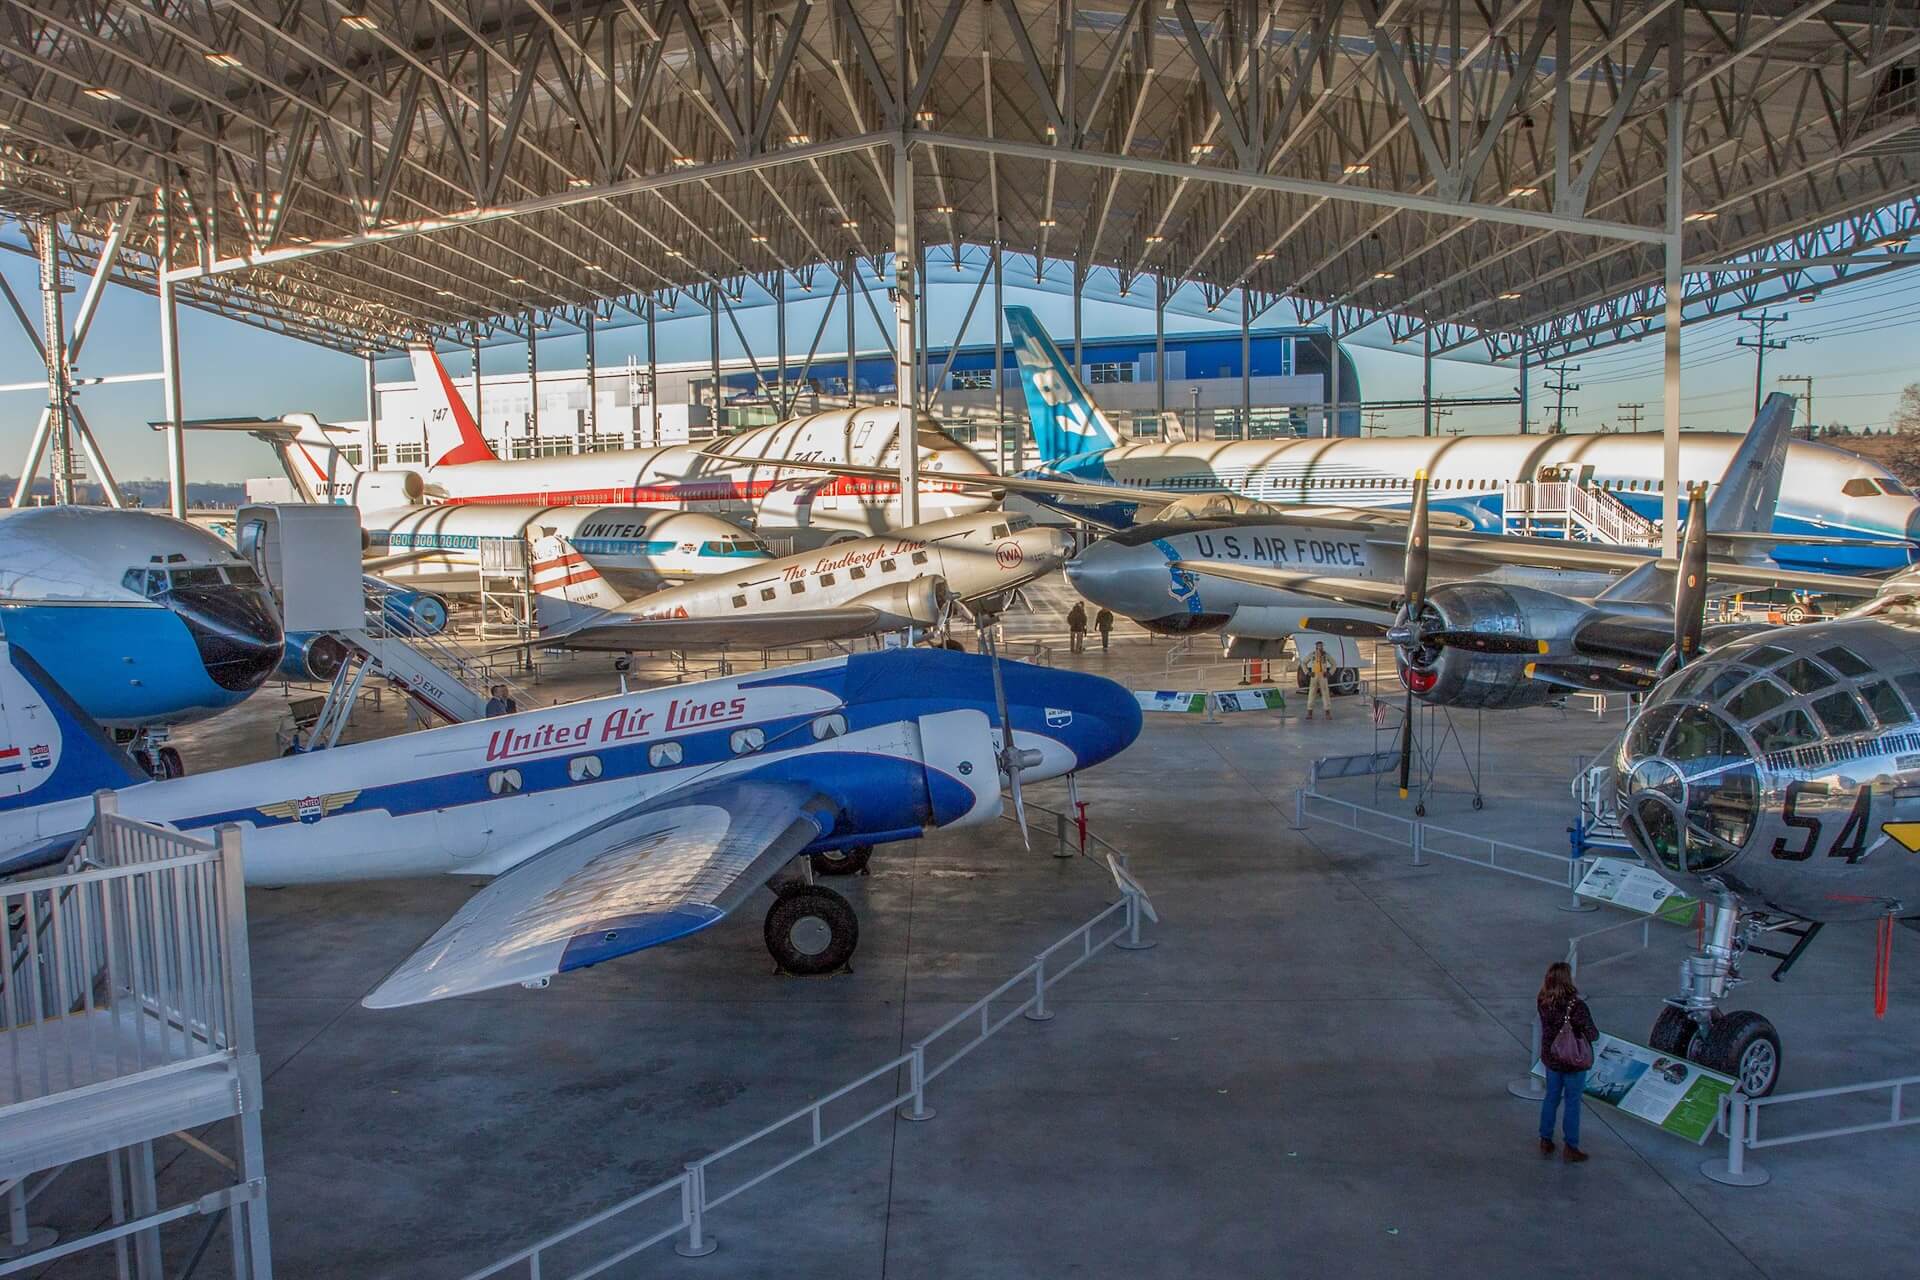 Planes in a hanger at the Museum of Flight in the Metro Puget Sound region